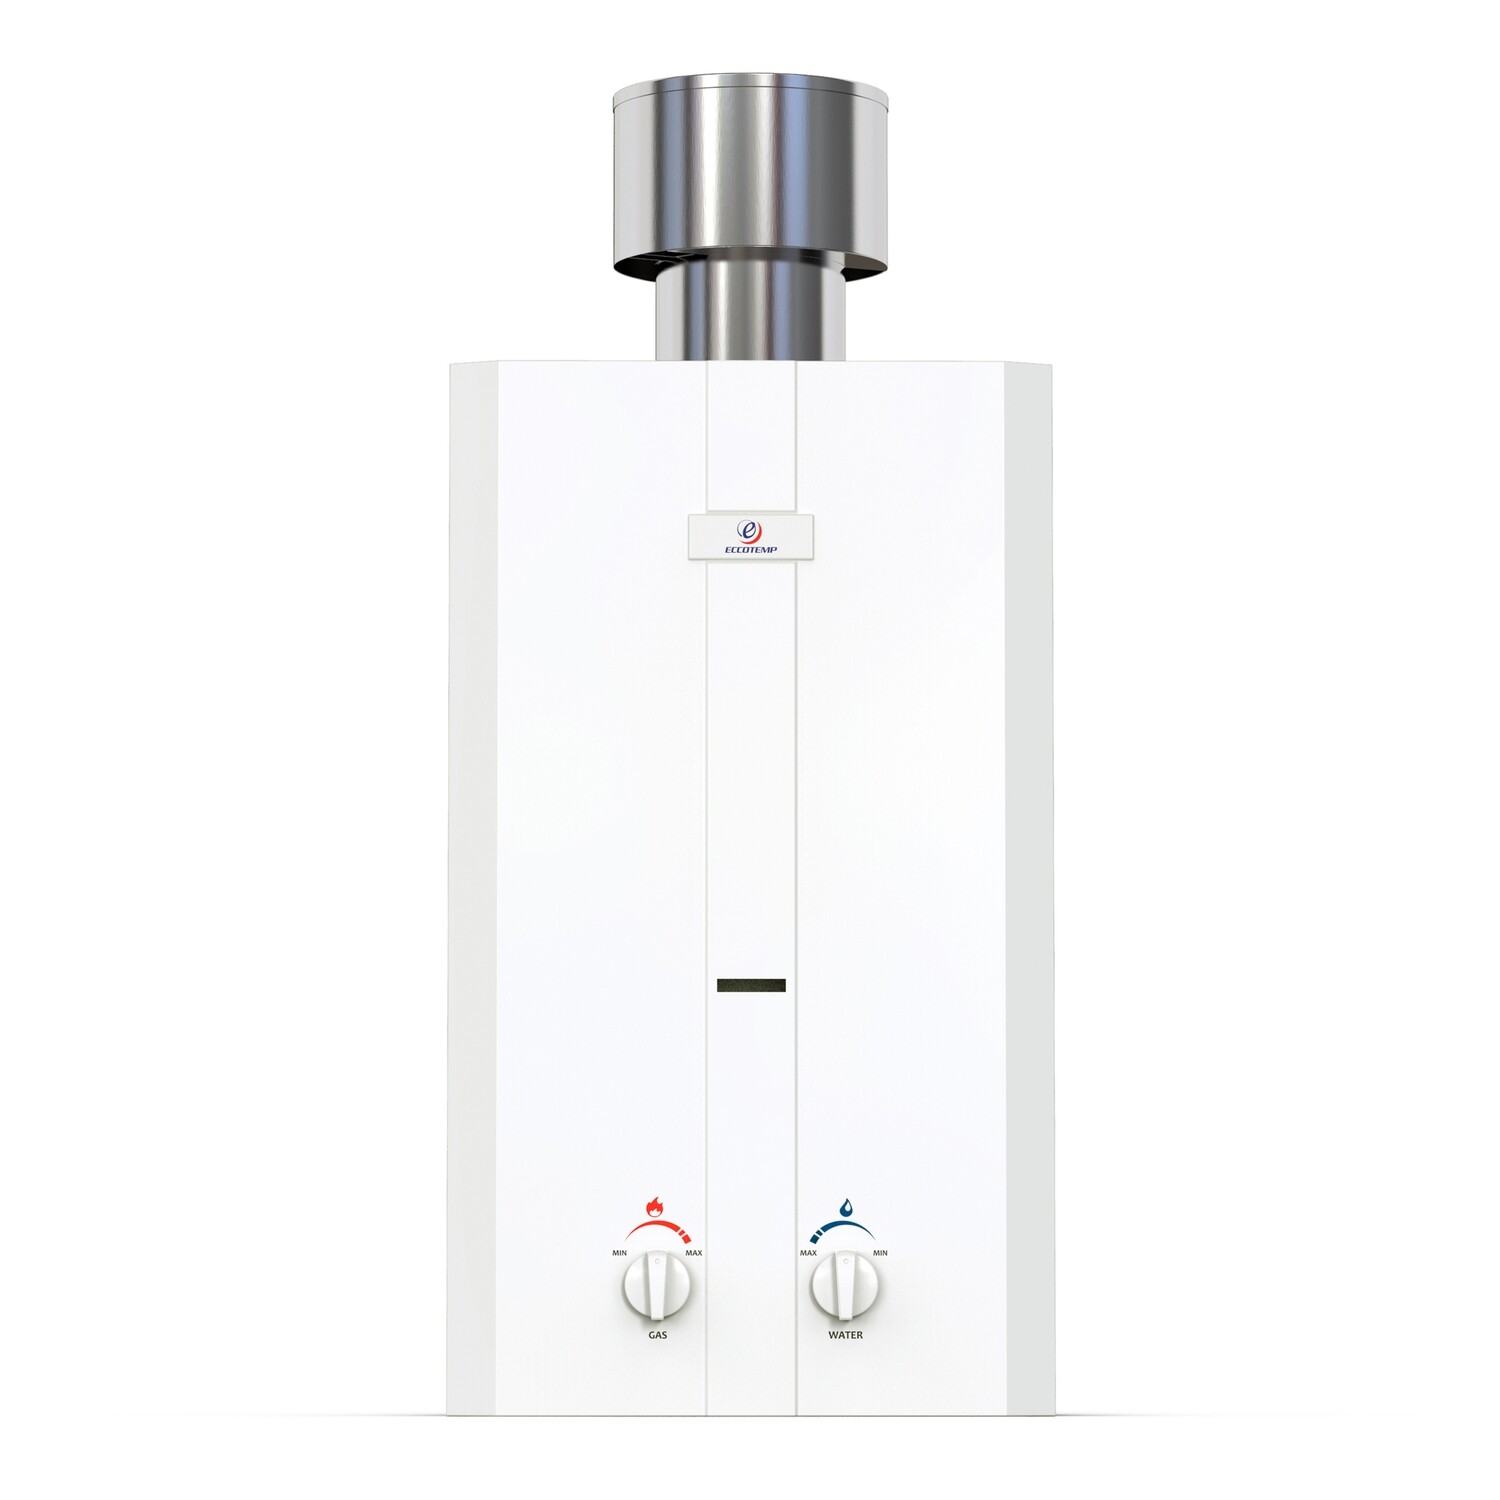 Eccotemp L10 Portable Outdoor Tankless Water Heater